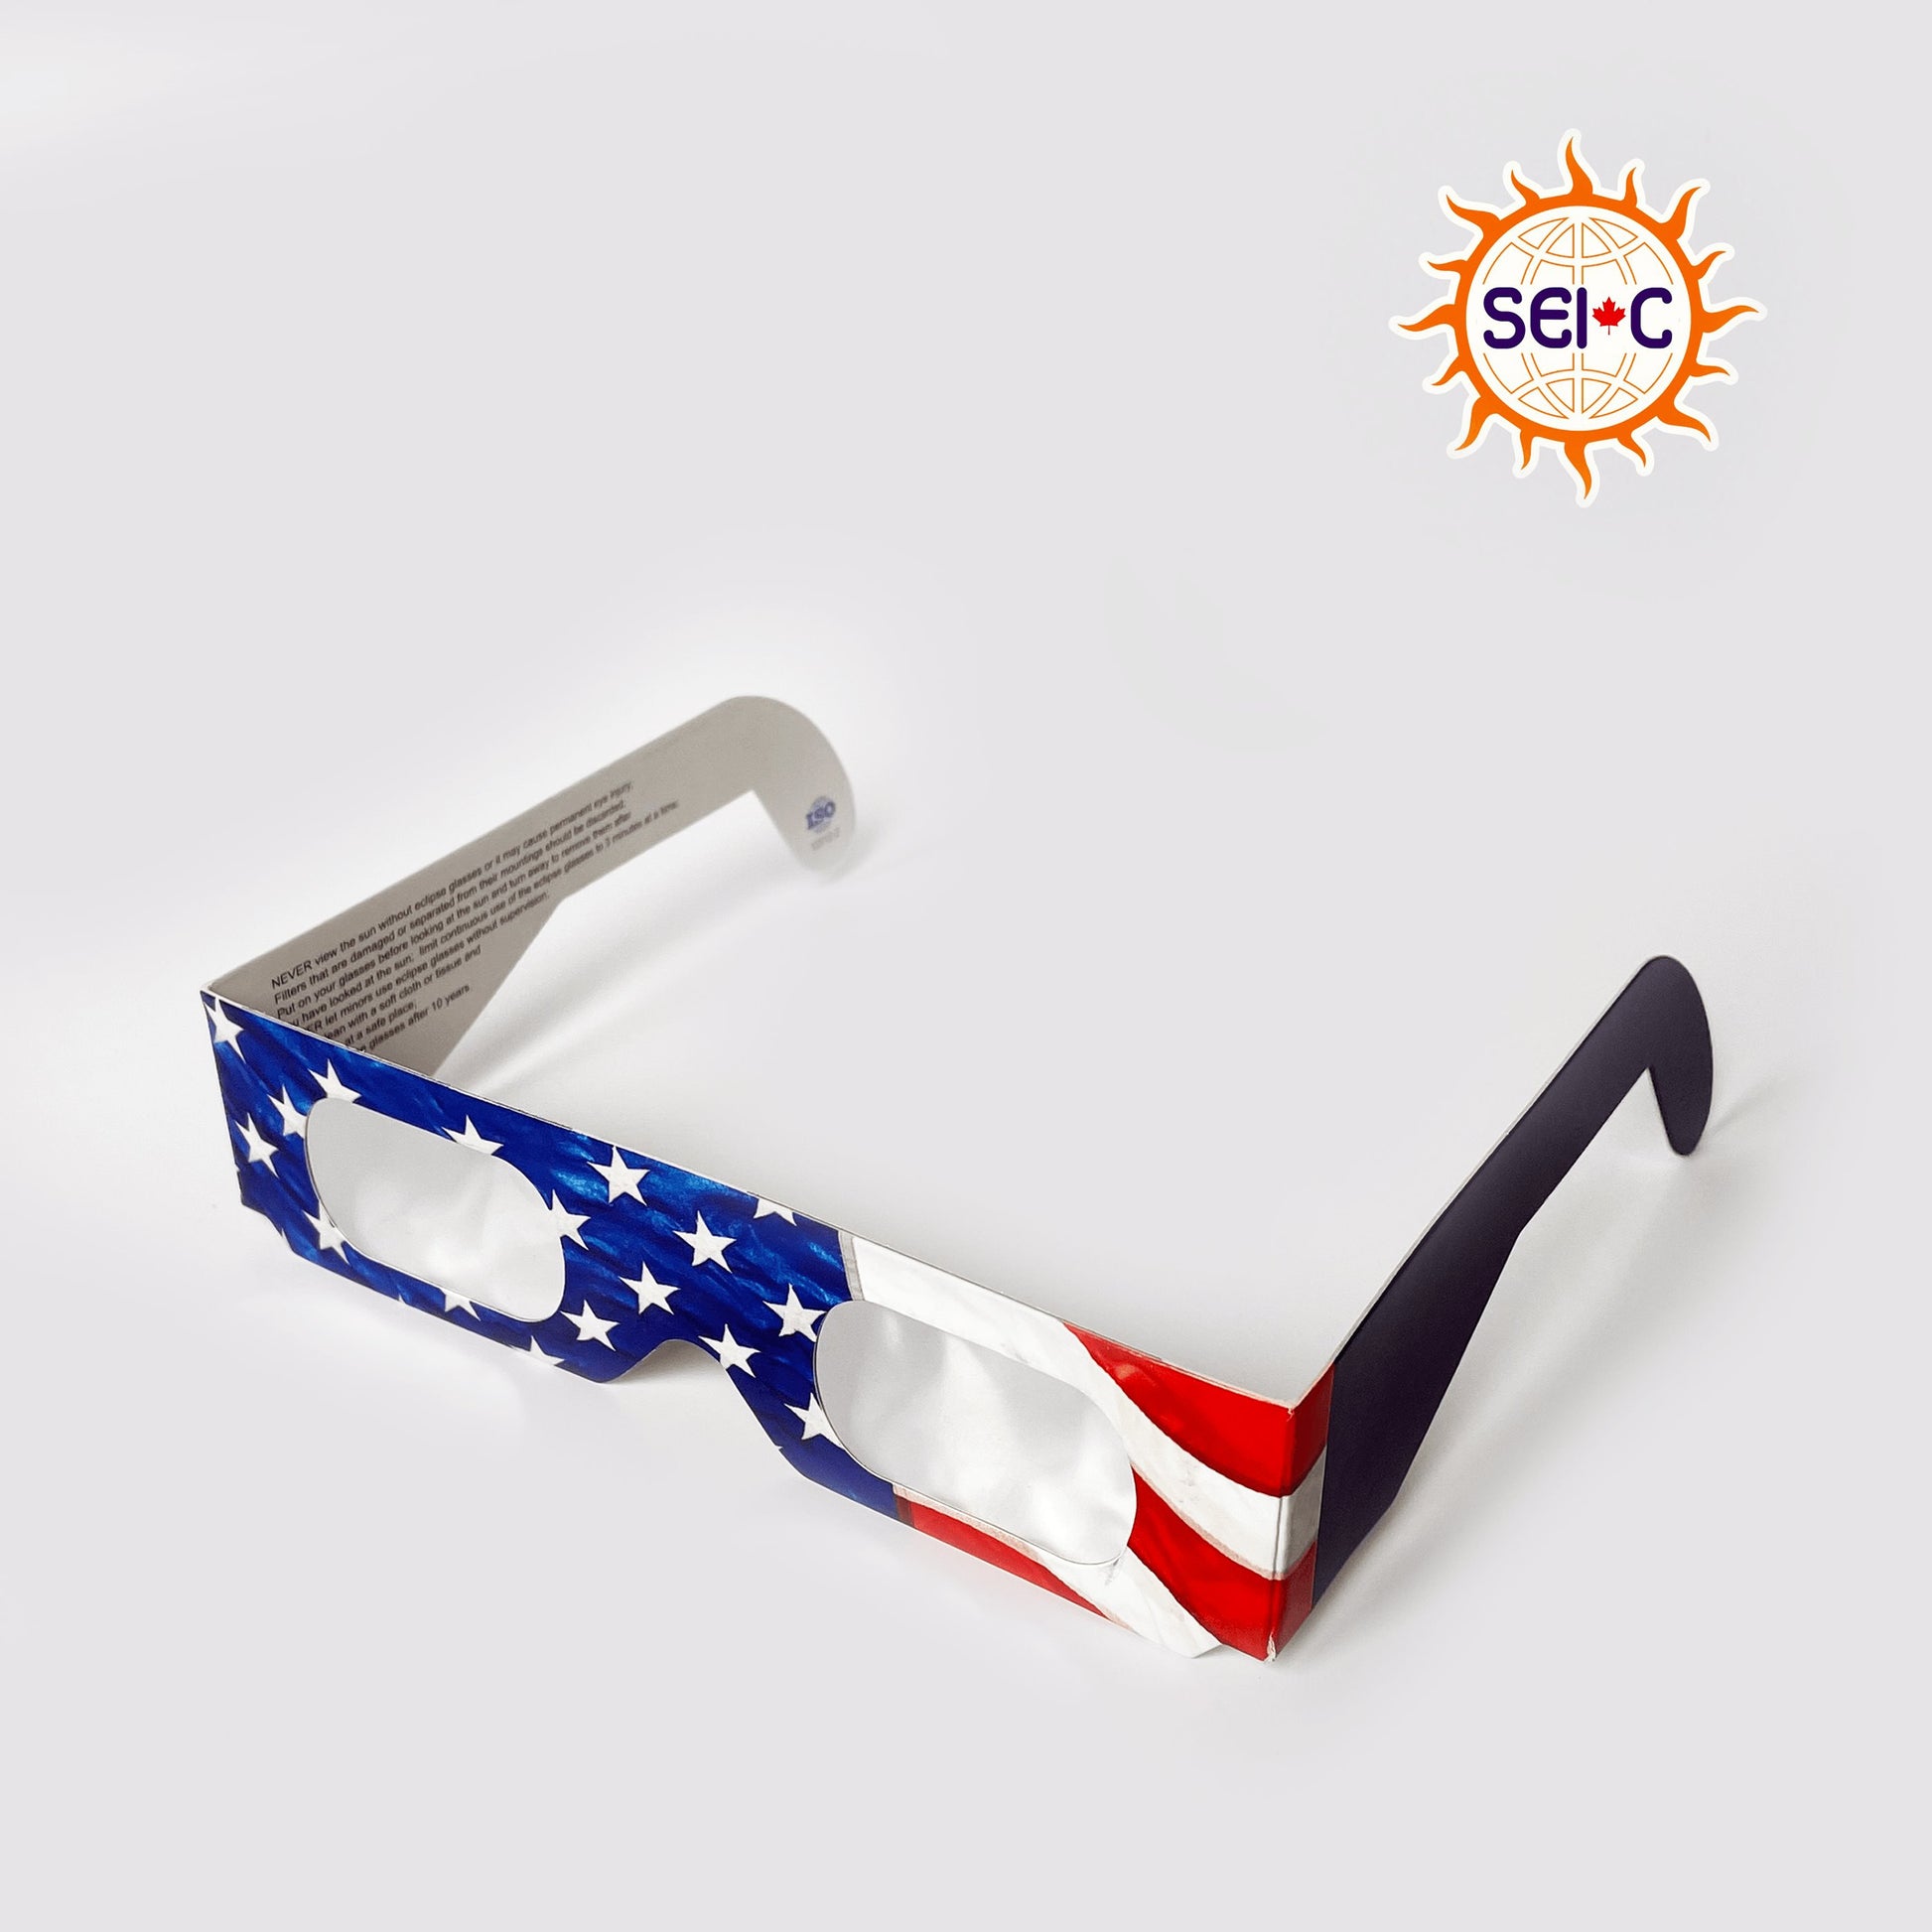 SEIC Paper Solar Eclipse Glasses, CE and ISO Certified Eclipse Shade for Direct Sun Viewing (Pack of 100 Unfolded) solar eclipse glasses Solar Eclipse International 